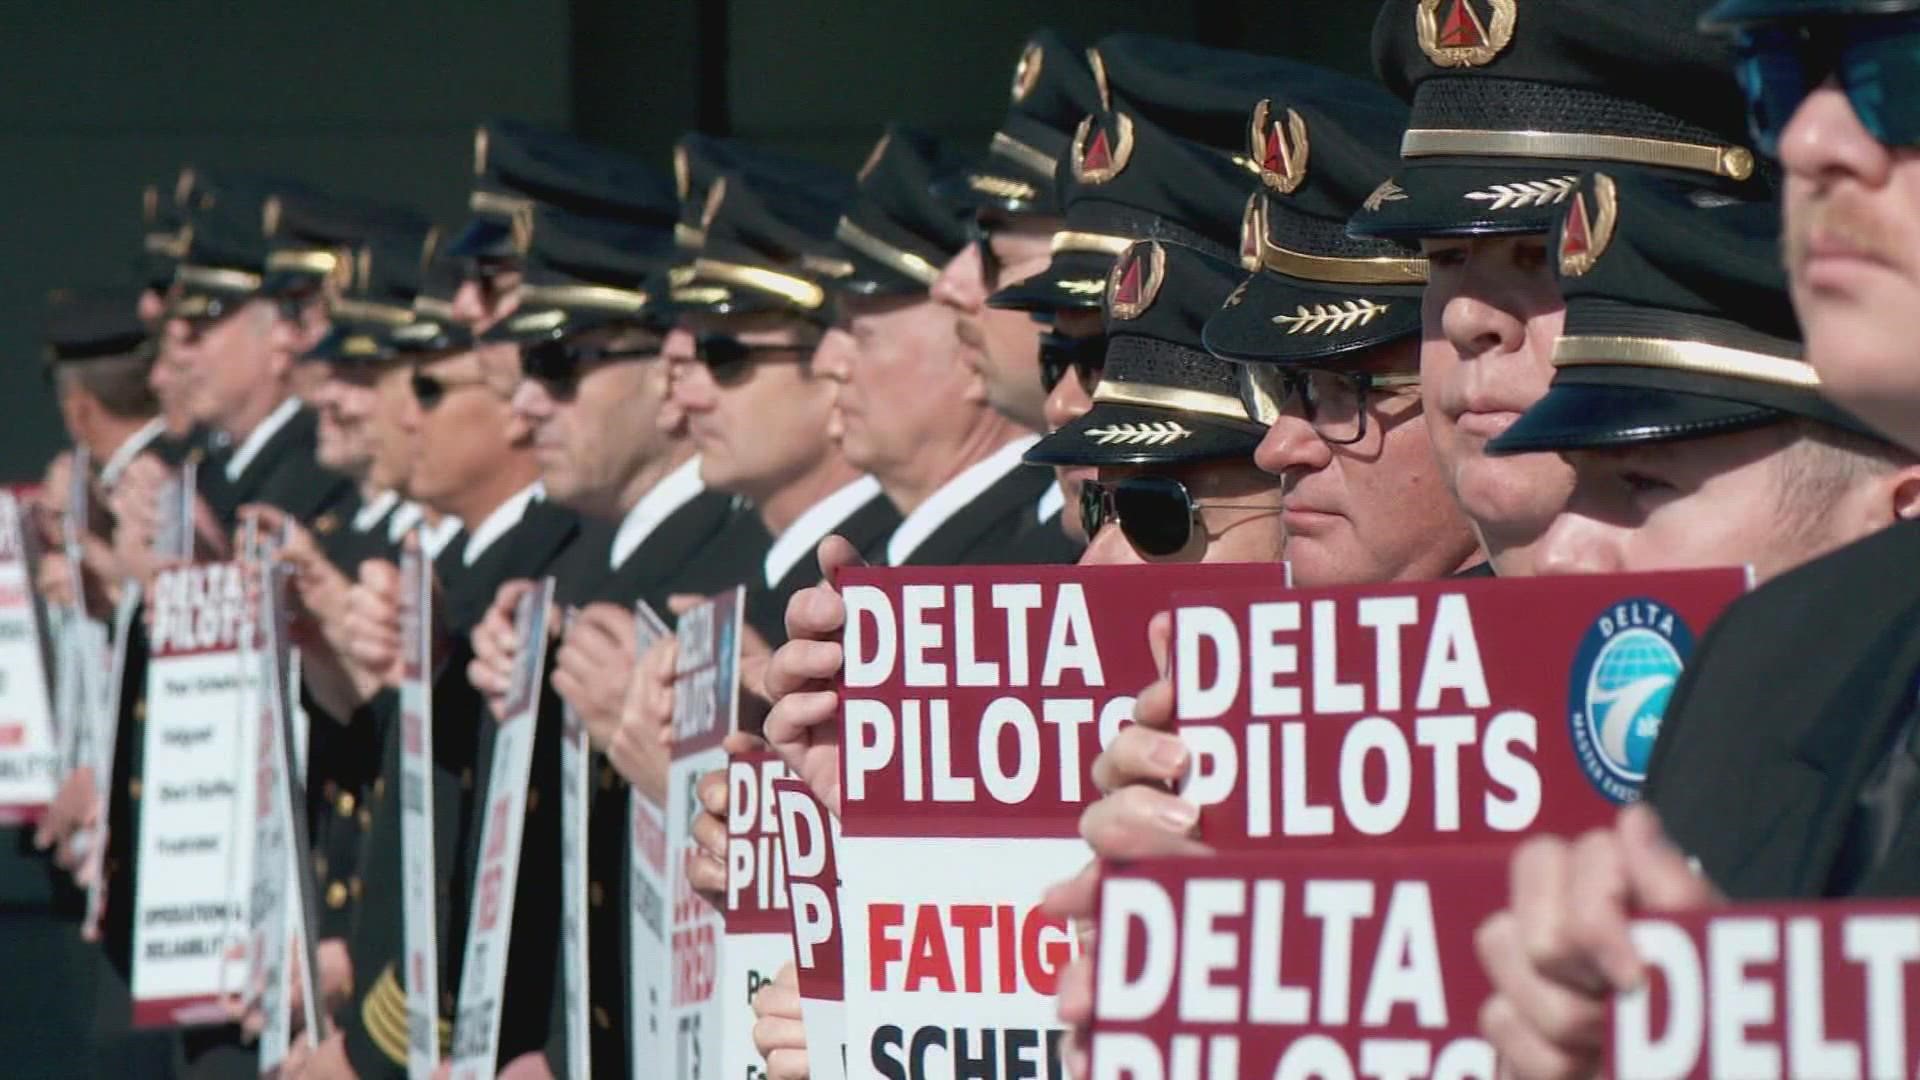 The picket will involve off-duty pilots and will not affect flight schedules